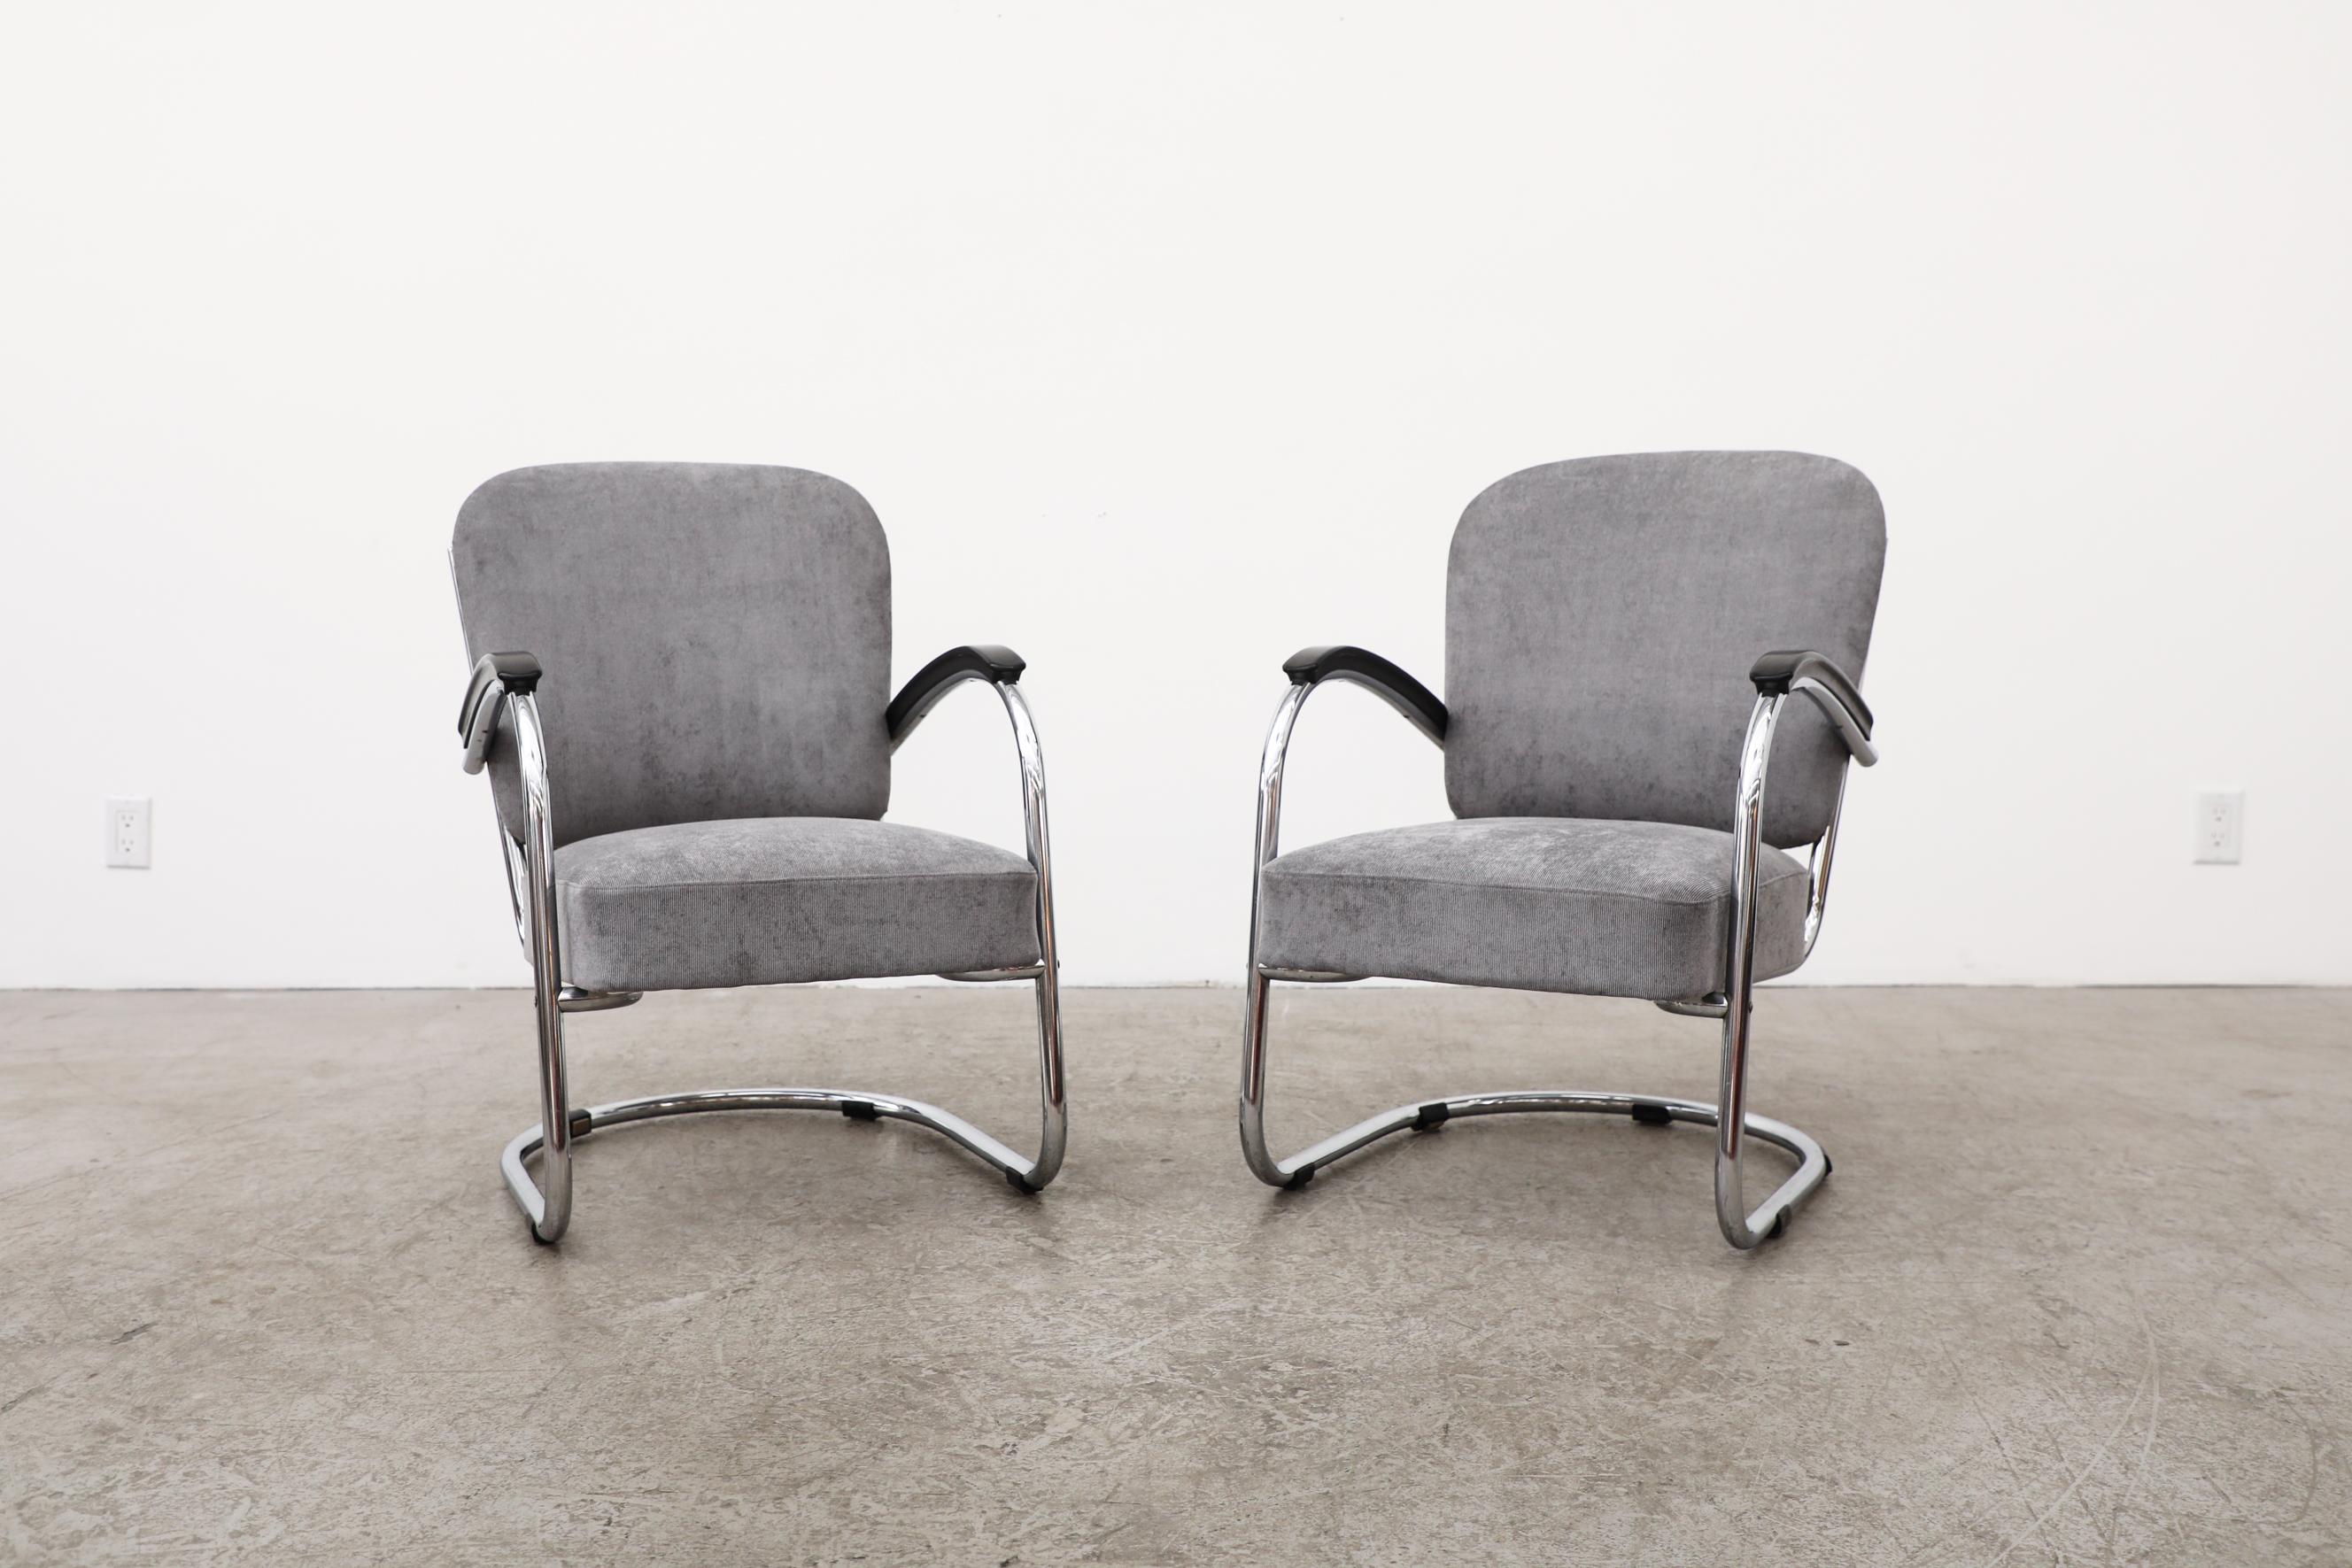 This pair of model No. 436 upholstered lounge chairs, designed by Paul Schuitema, 1930's have chrome frames and bakelite armrests. Made for D3, a Rotterdam based furniture store which shuttered in 1936. The frames are in good original condition with